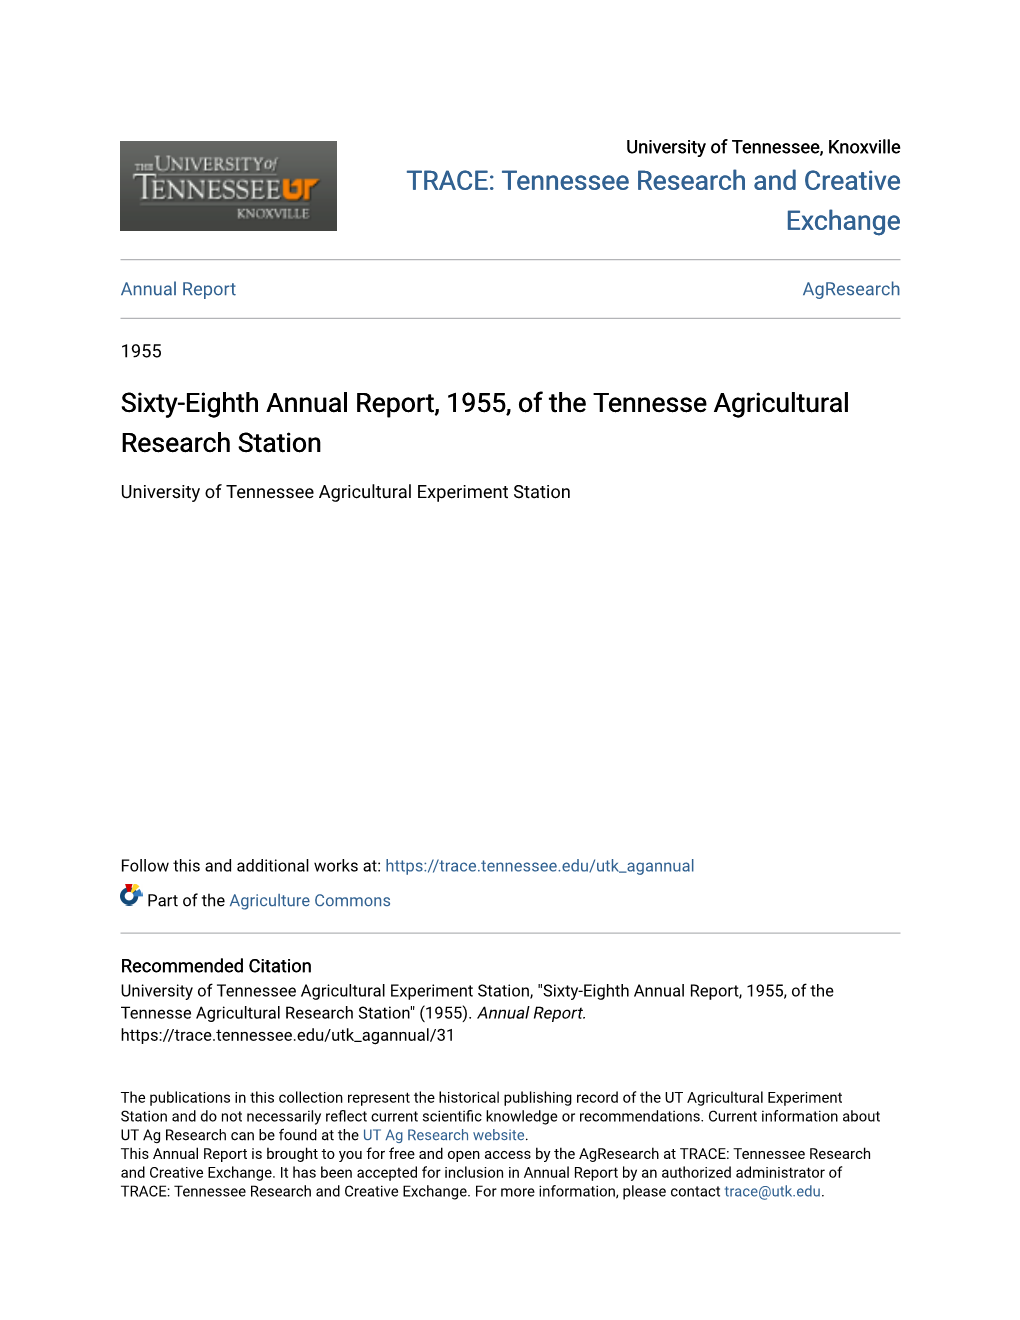 Sixty-Eighth Annual Report, 1955, of the Tennesse Agricultural Research Station